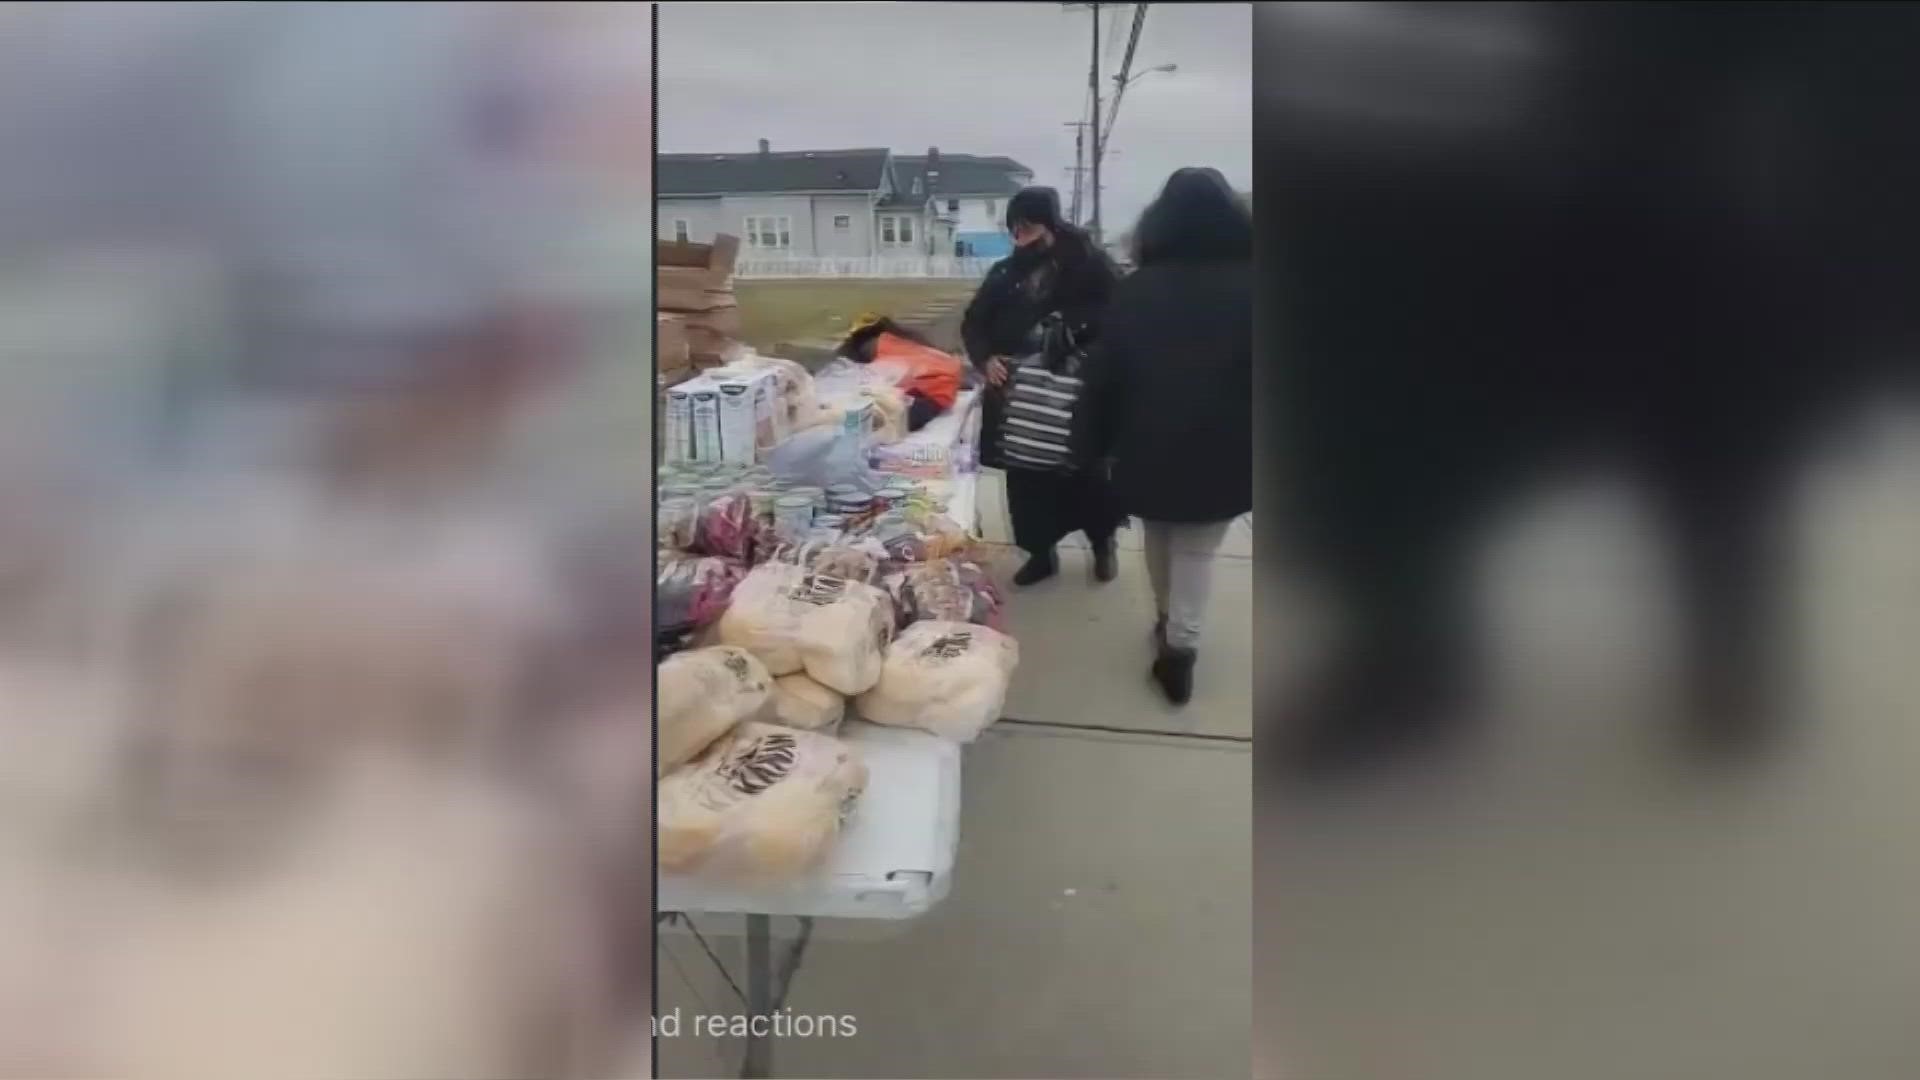 her first food drive was actually just before the May 14th shooting...she said once she got the call of what happened... she made a determination to not stop.